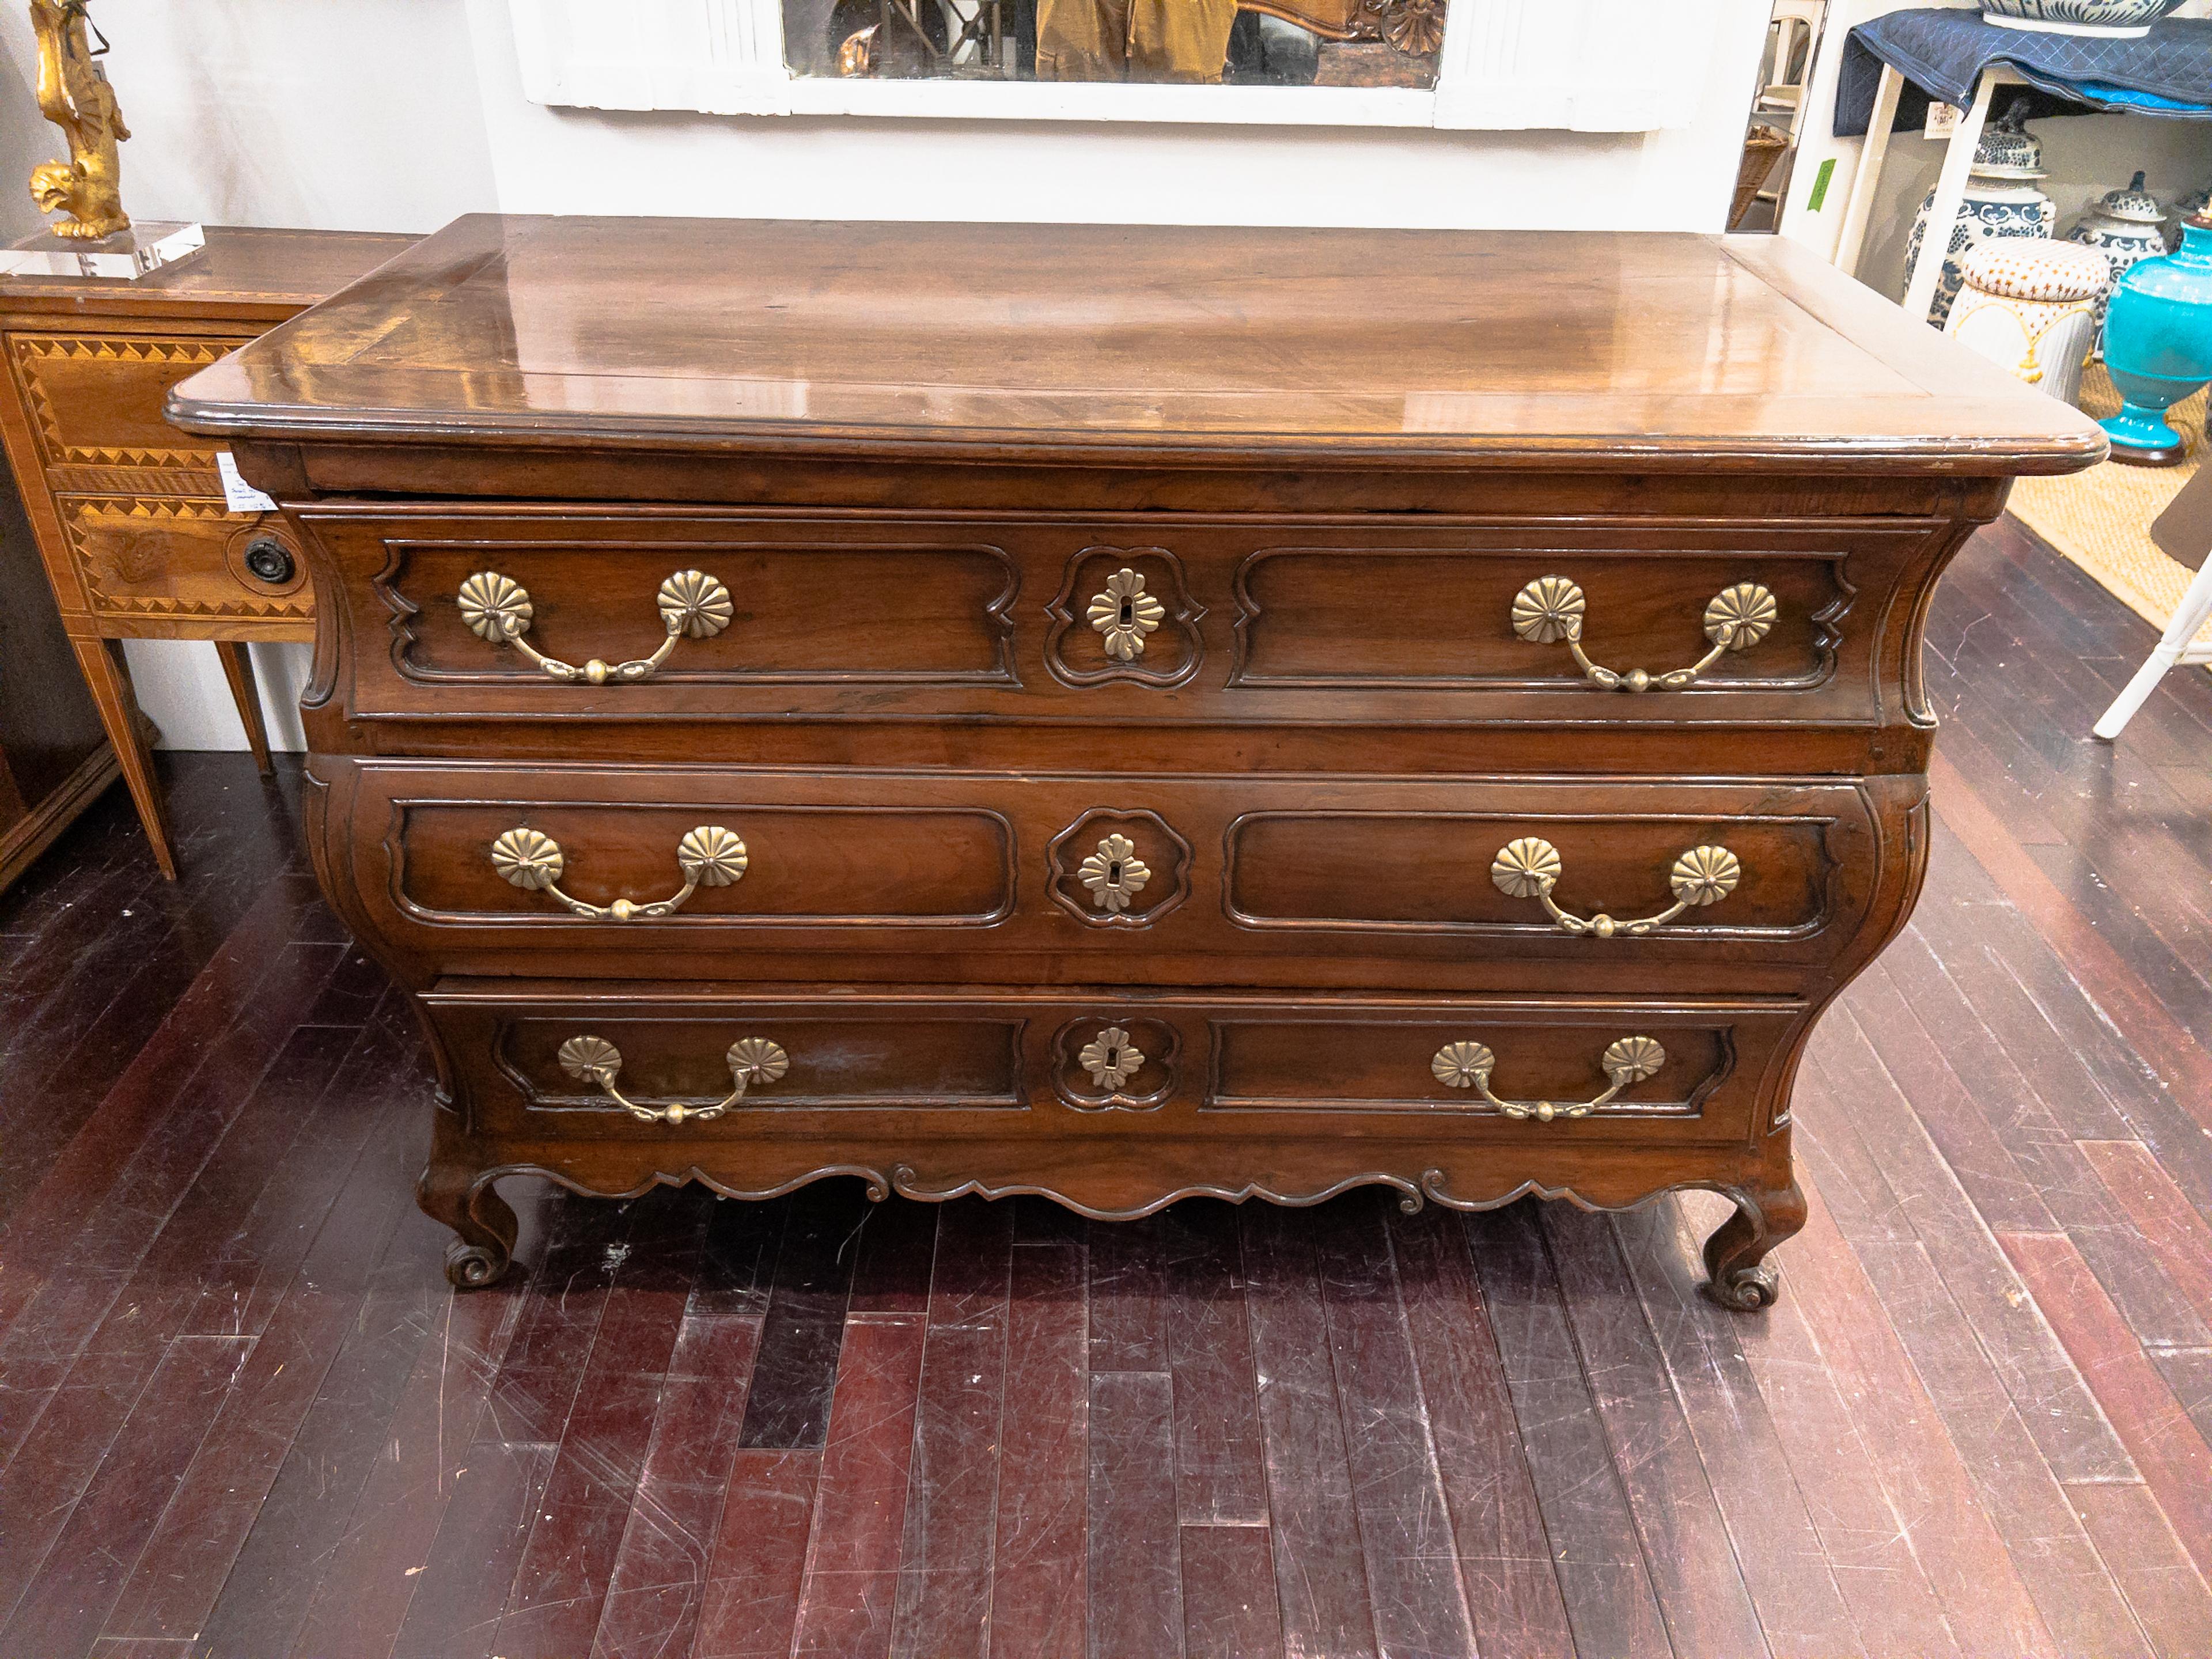 19th Century Three Drawer Provincial Commode, with brass hardware, shaped curved front and sides, opening with 3 drawers in three rows. The highly curved sides are paneled and molded. It rests on 4 carved feet.